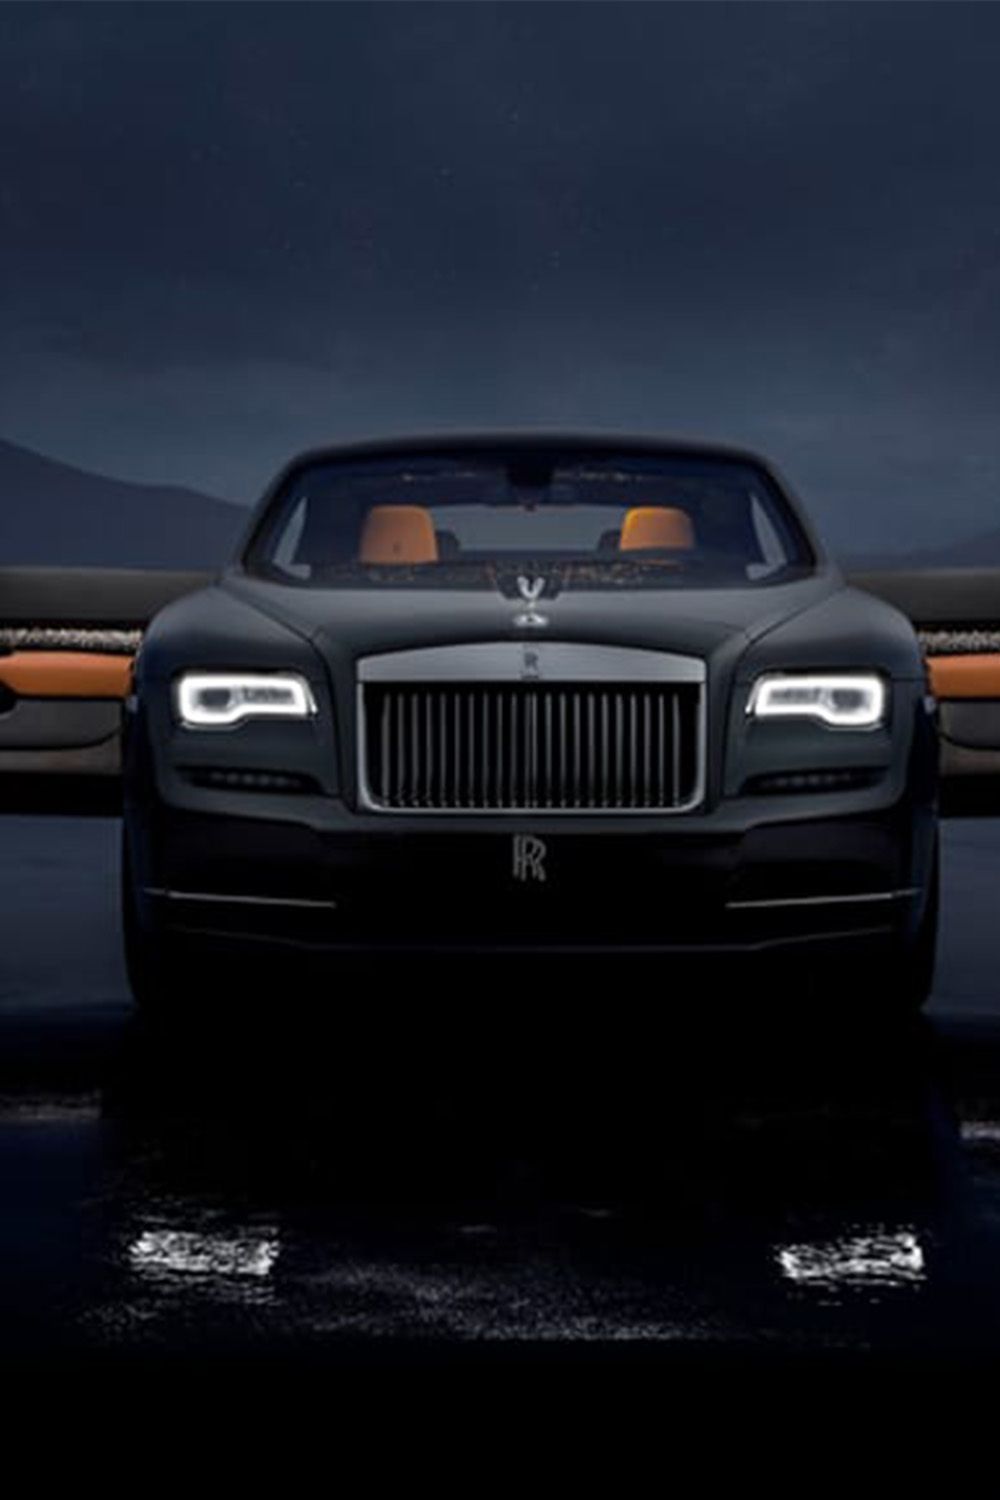 Why Rolls Royce Vehicles Are So Costly. Luxury Cars Rolls Royce, Rolls Royce Wallpaper, Rolls Royce Cars